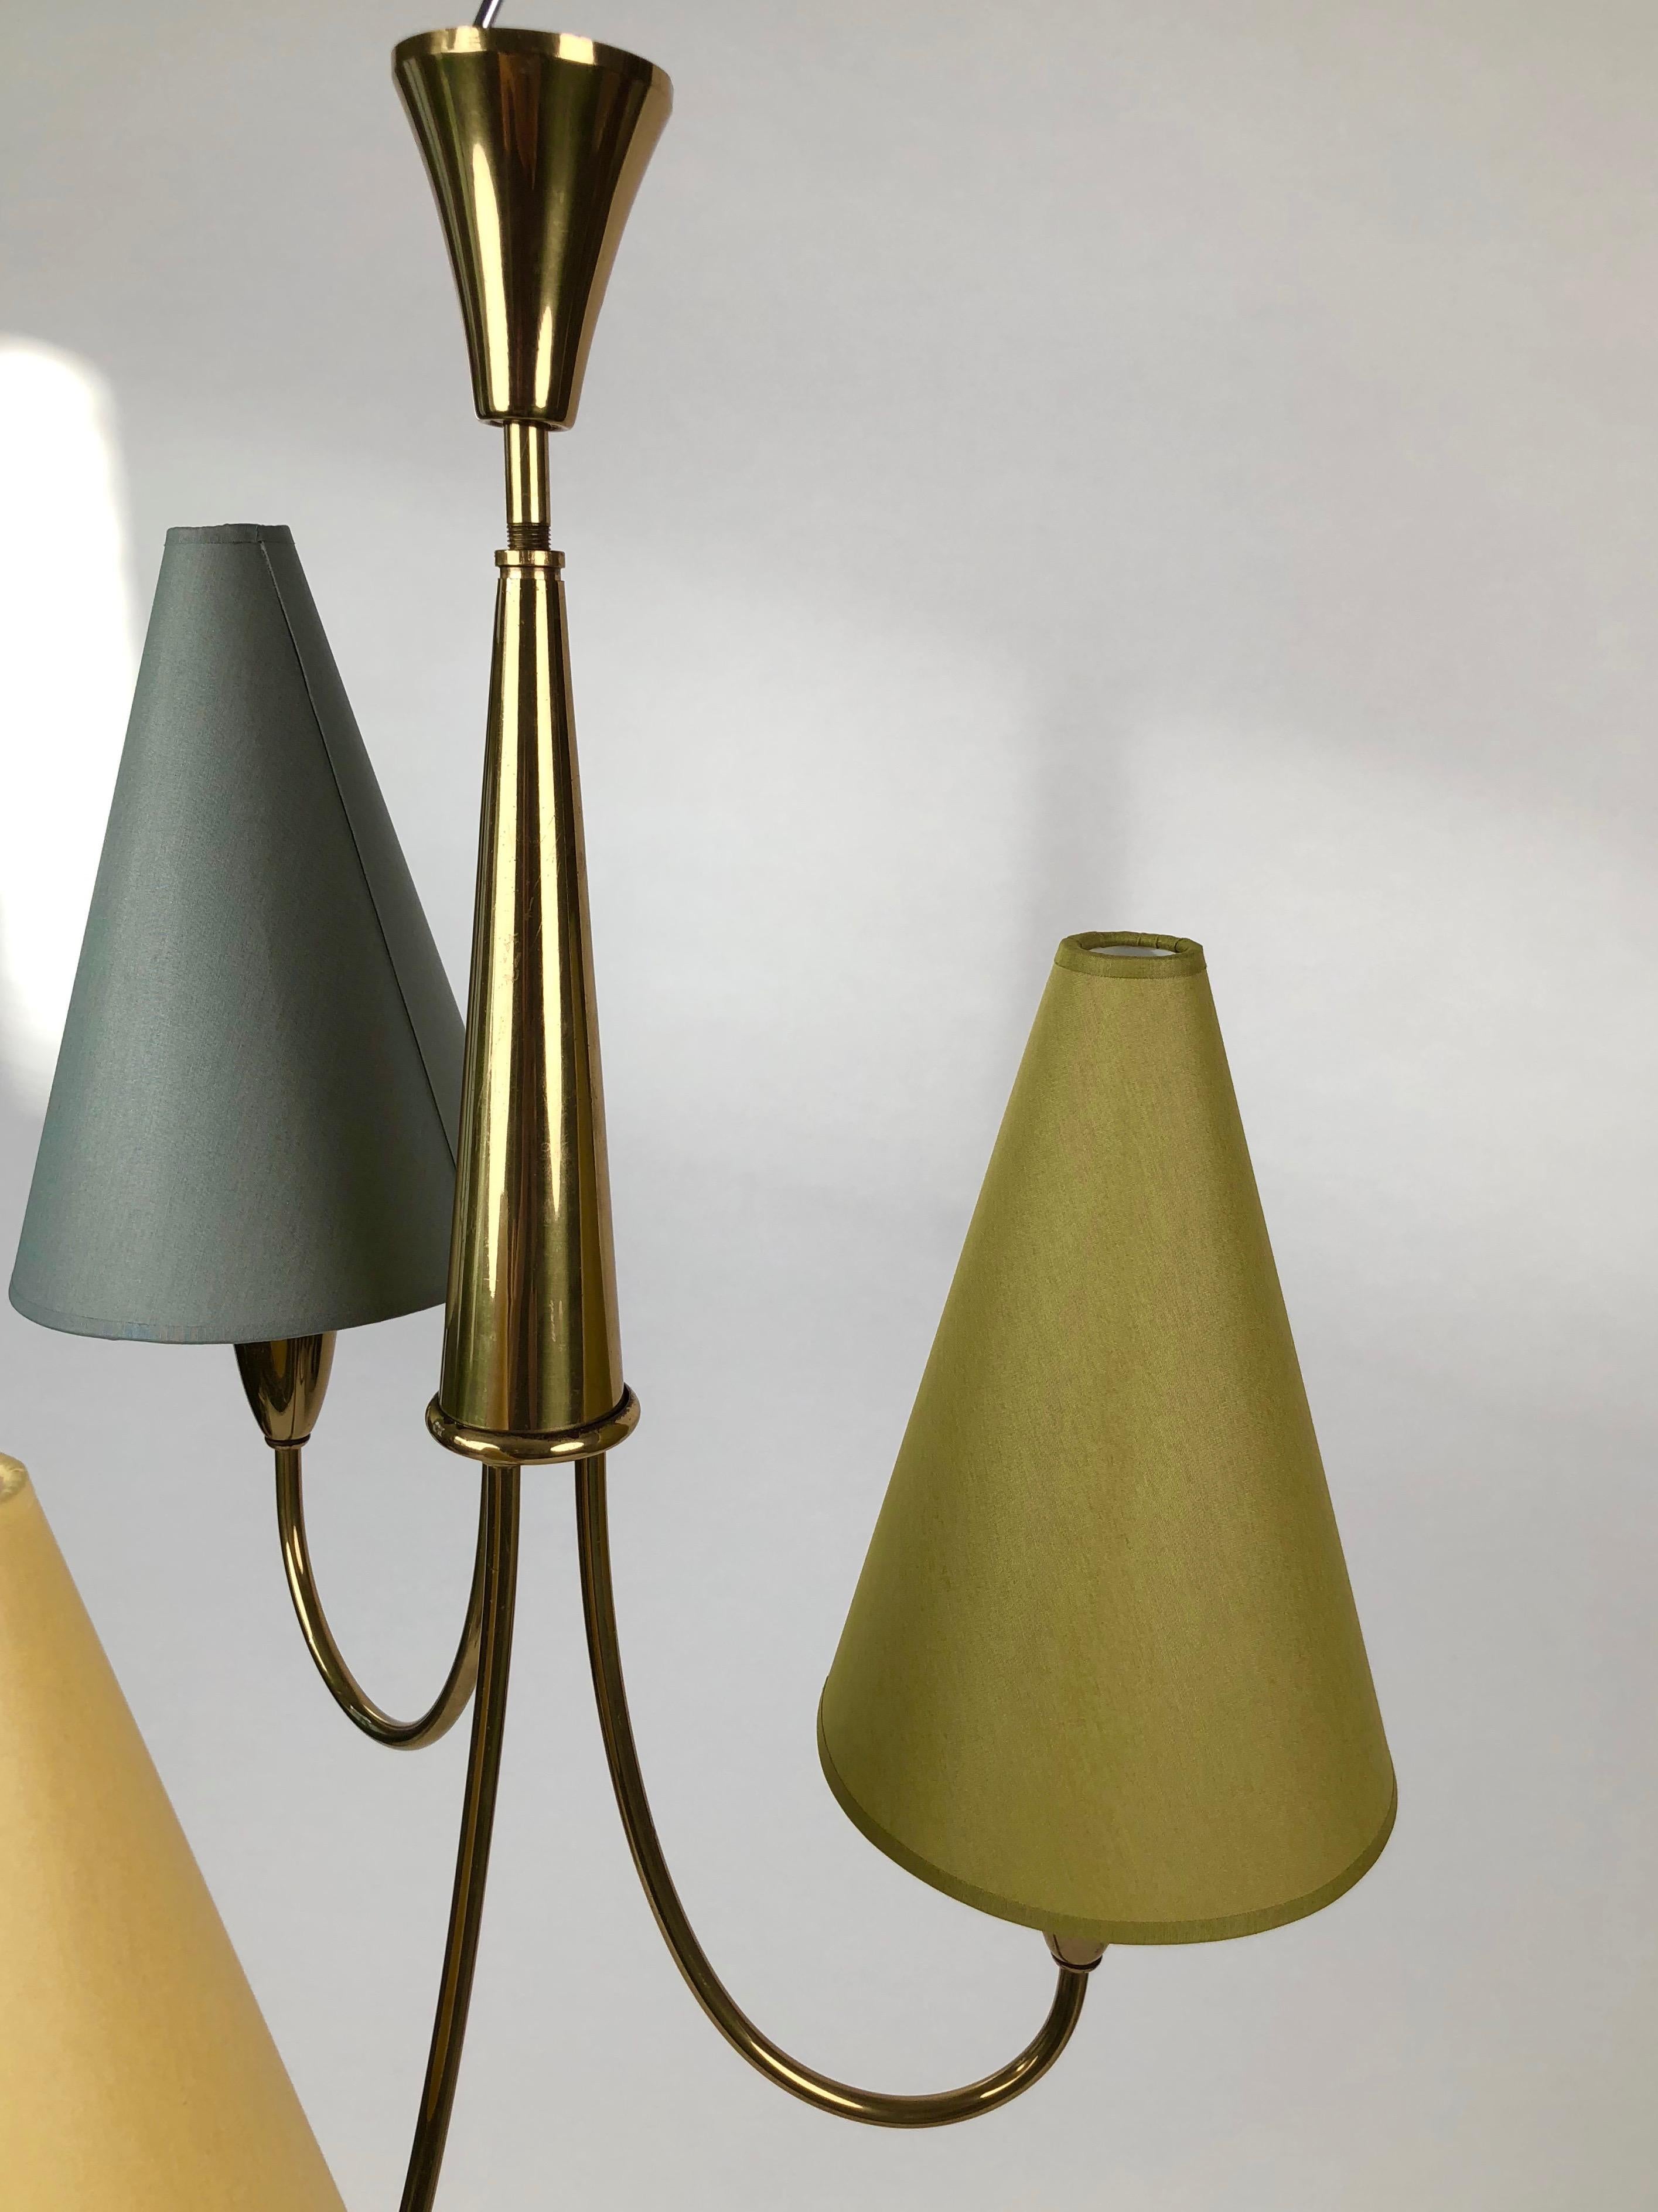 Lovely midcentury pendant lamp made in solid brass with cone shades that complement the shapes in the lamp.
The shades are new and has been rewired.